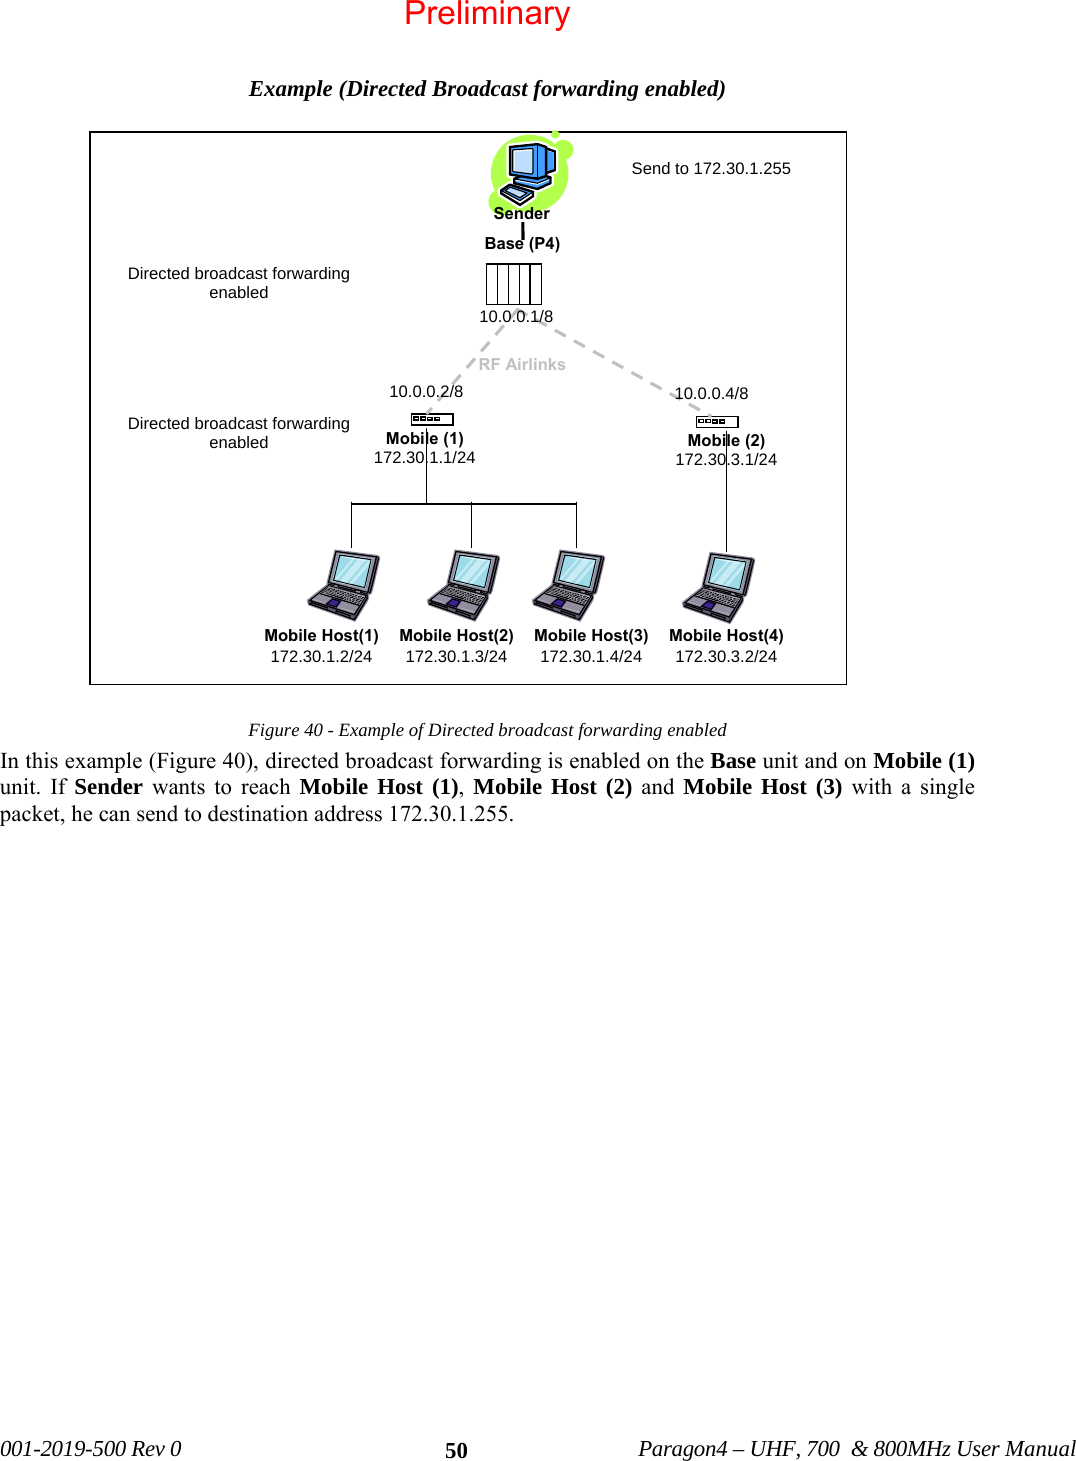   001-2019-500 Rev 0          Paragon4 – UHF, 700  &amp; 800MHz User Manual   50 Example (Directed Broadcast forwarding enabled)  Figure 40 - Example of Directed broadcast forwarding enabled In this example (Figure 40), directed broadcast forwarding is enabled on the Base unit and on Mobile (1) unit. If Sender wants to reach Mobile Host (1),  Mobile Host (2) and Mobile Host (3) with a single packet, he can send to destination address 172.30.1.255.               Sender  Base (P4) RF AirlinksMobile Host(2)172.30.1.3/24Mobile Host(3)172.30.1.4/24Mobile (1) 172.30.1.1/24 Mobile (2) 172.30.3.1/24 Mobile Host(1)172.30.1.2/24Mobile Host(4) 172.30.3.2/24 Directed broadcast forwarding enabled Directed broadcast forwarding enabled Send to 172.30.1.255 10.0.0.1/8 10.0.0.2/8  10.0.0.4/8 Preliminary